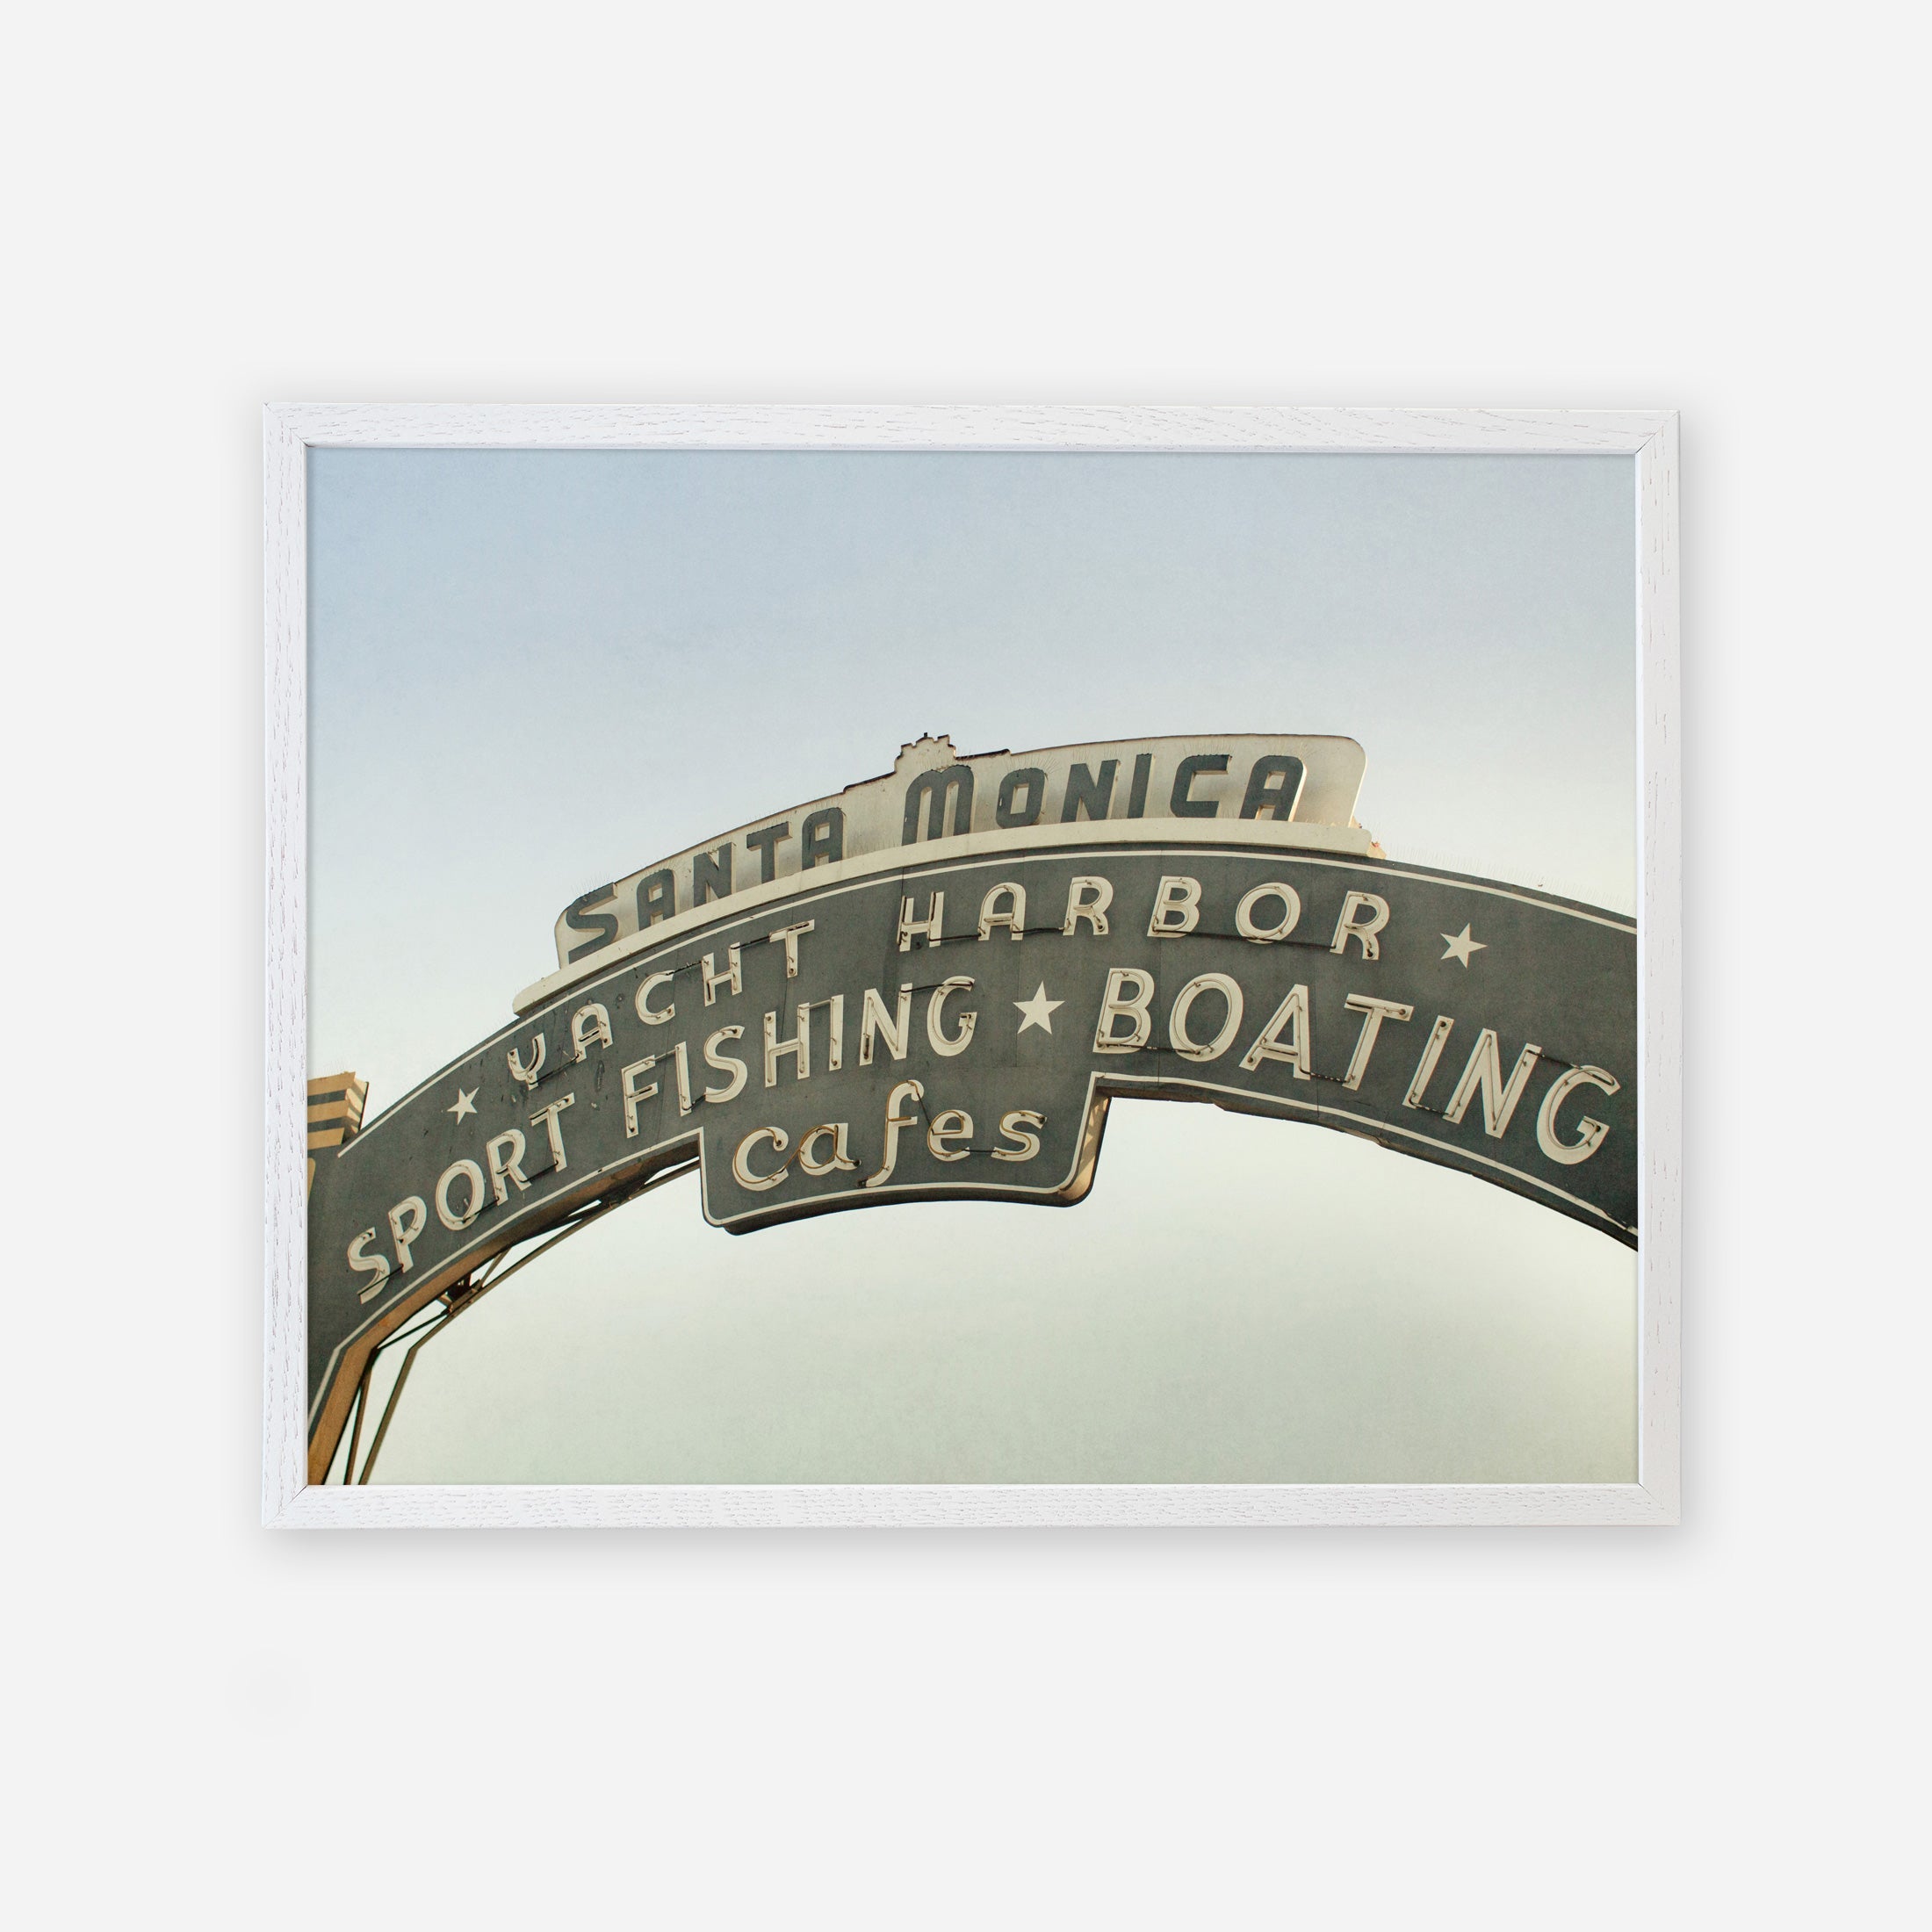 Vintage styled Los Angeles California Print, &#39;Santa Monica Pier Blues&#39; by Offley Green that reads &quot;Santa Monica yacht harbor sport fishing boating cafes&quot; against a clear sky, framed by a white border, captured as an archival photographic print.